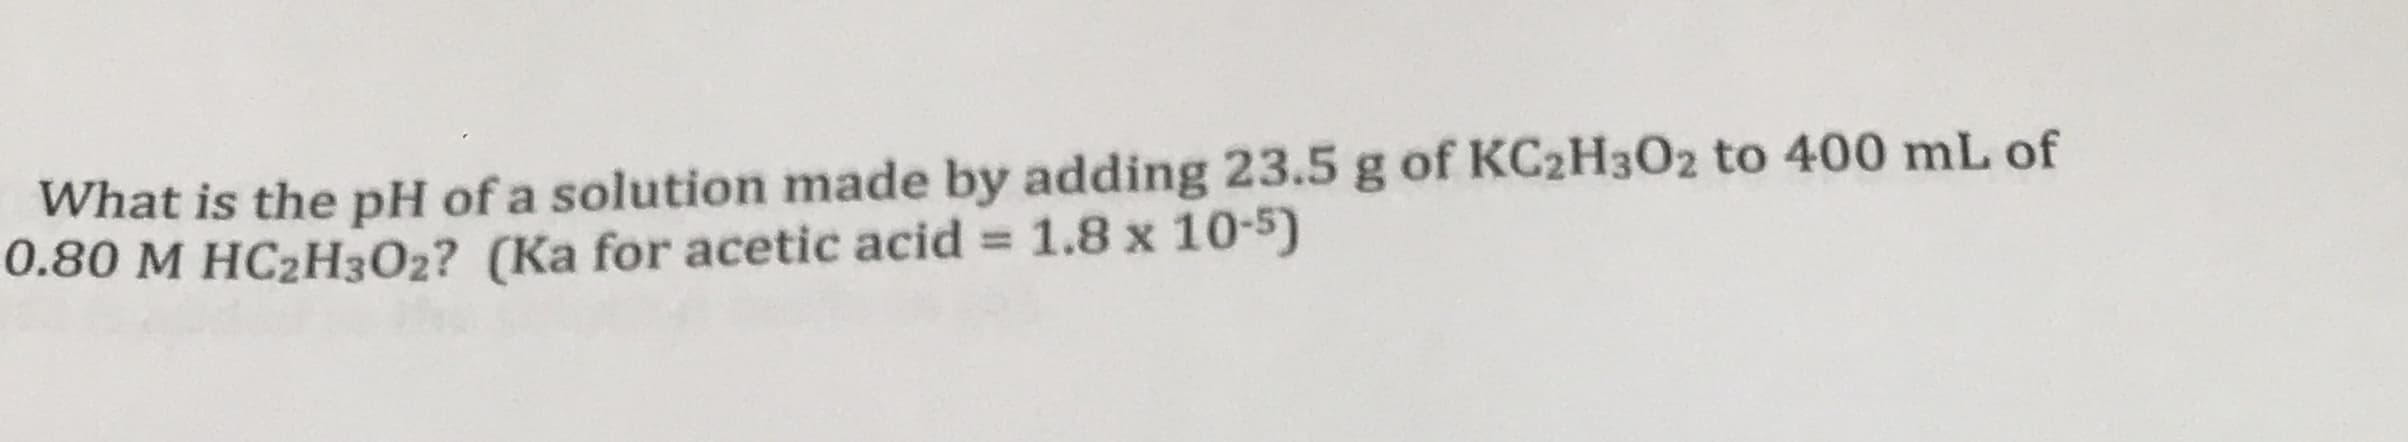 What is the pH of a solution made by adding 23.5 g of KC2H3O2 to 400 mL of
0.80 M HC2H3O2? (Ka for acetic acid = 1.8 x 10-5)
